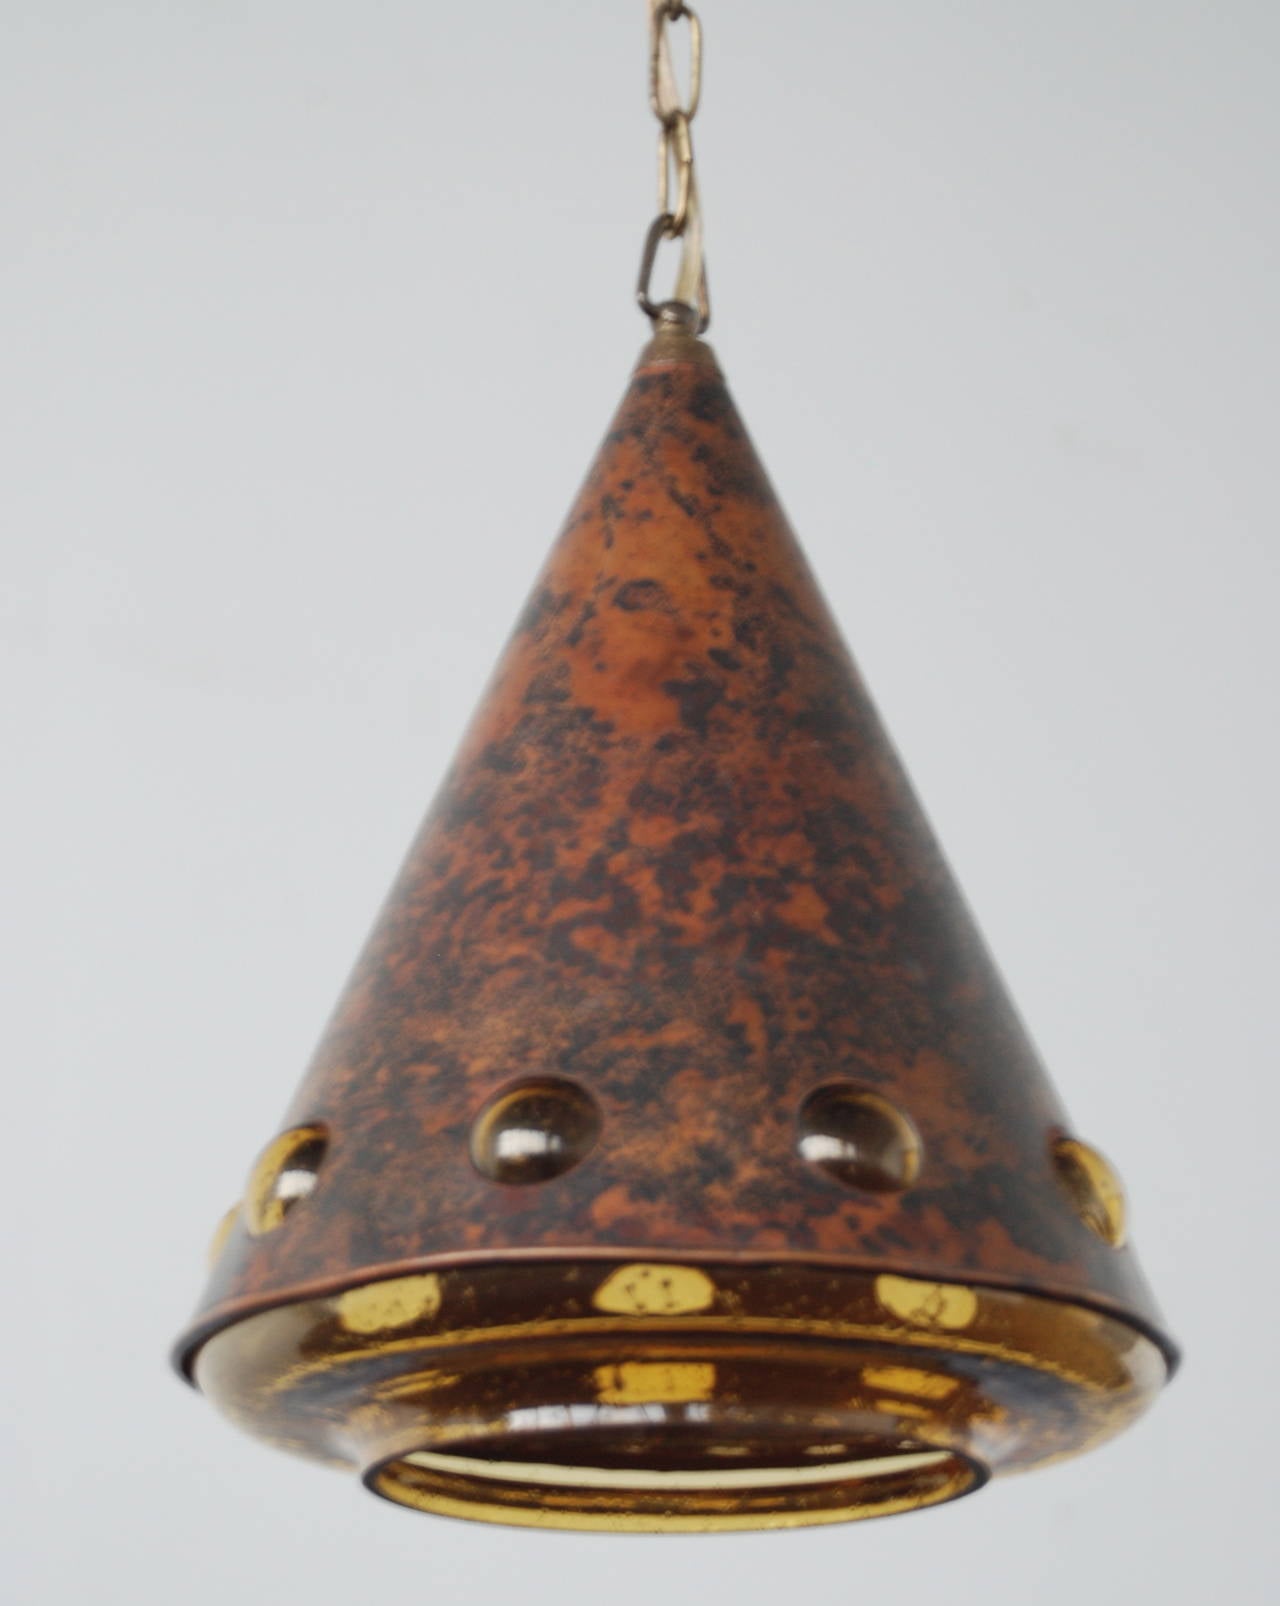 A pendant designed by Nanny Still McKinney for RAAK, Netherlands, circa 1960s. Solid amber glass cone with patinated copper cower.
Small crack inside the glass shade. Dimensions: H 13